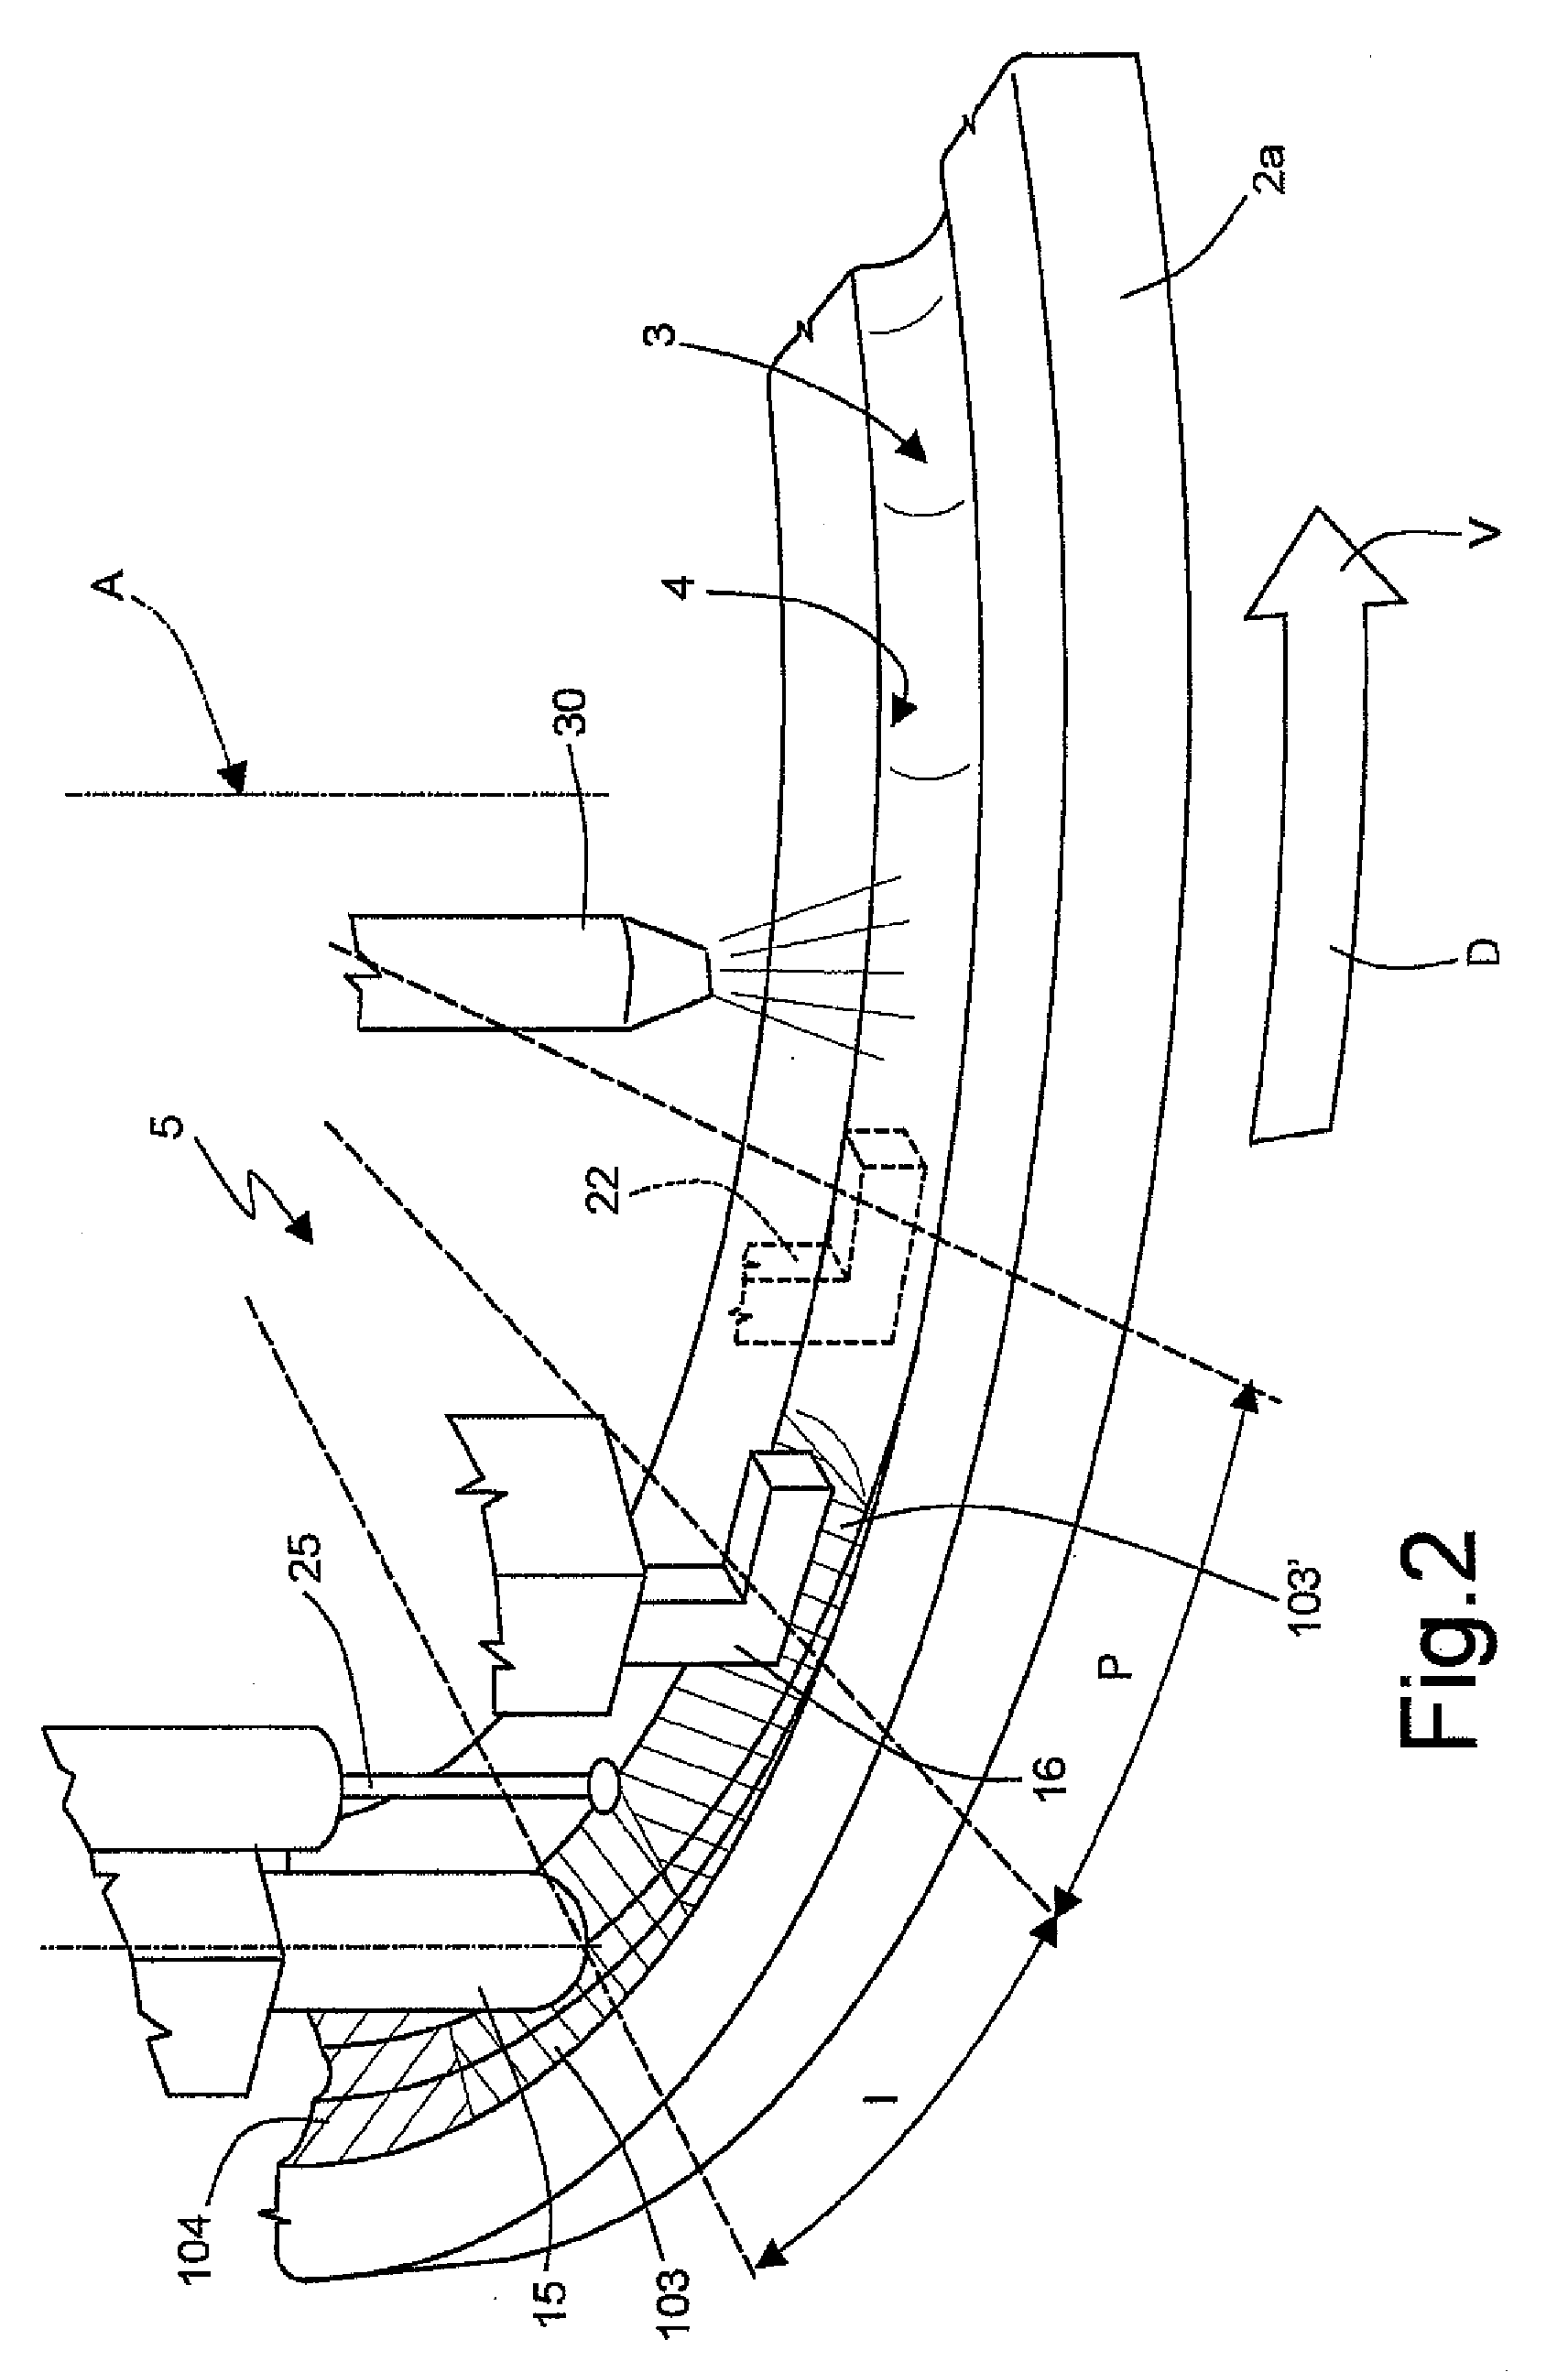 Device and method for performing a localized induction hardening treatment on mechanical components, specifically thrust blocks for large-sized rolling bearings